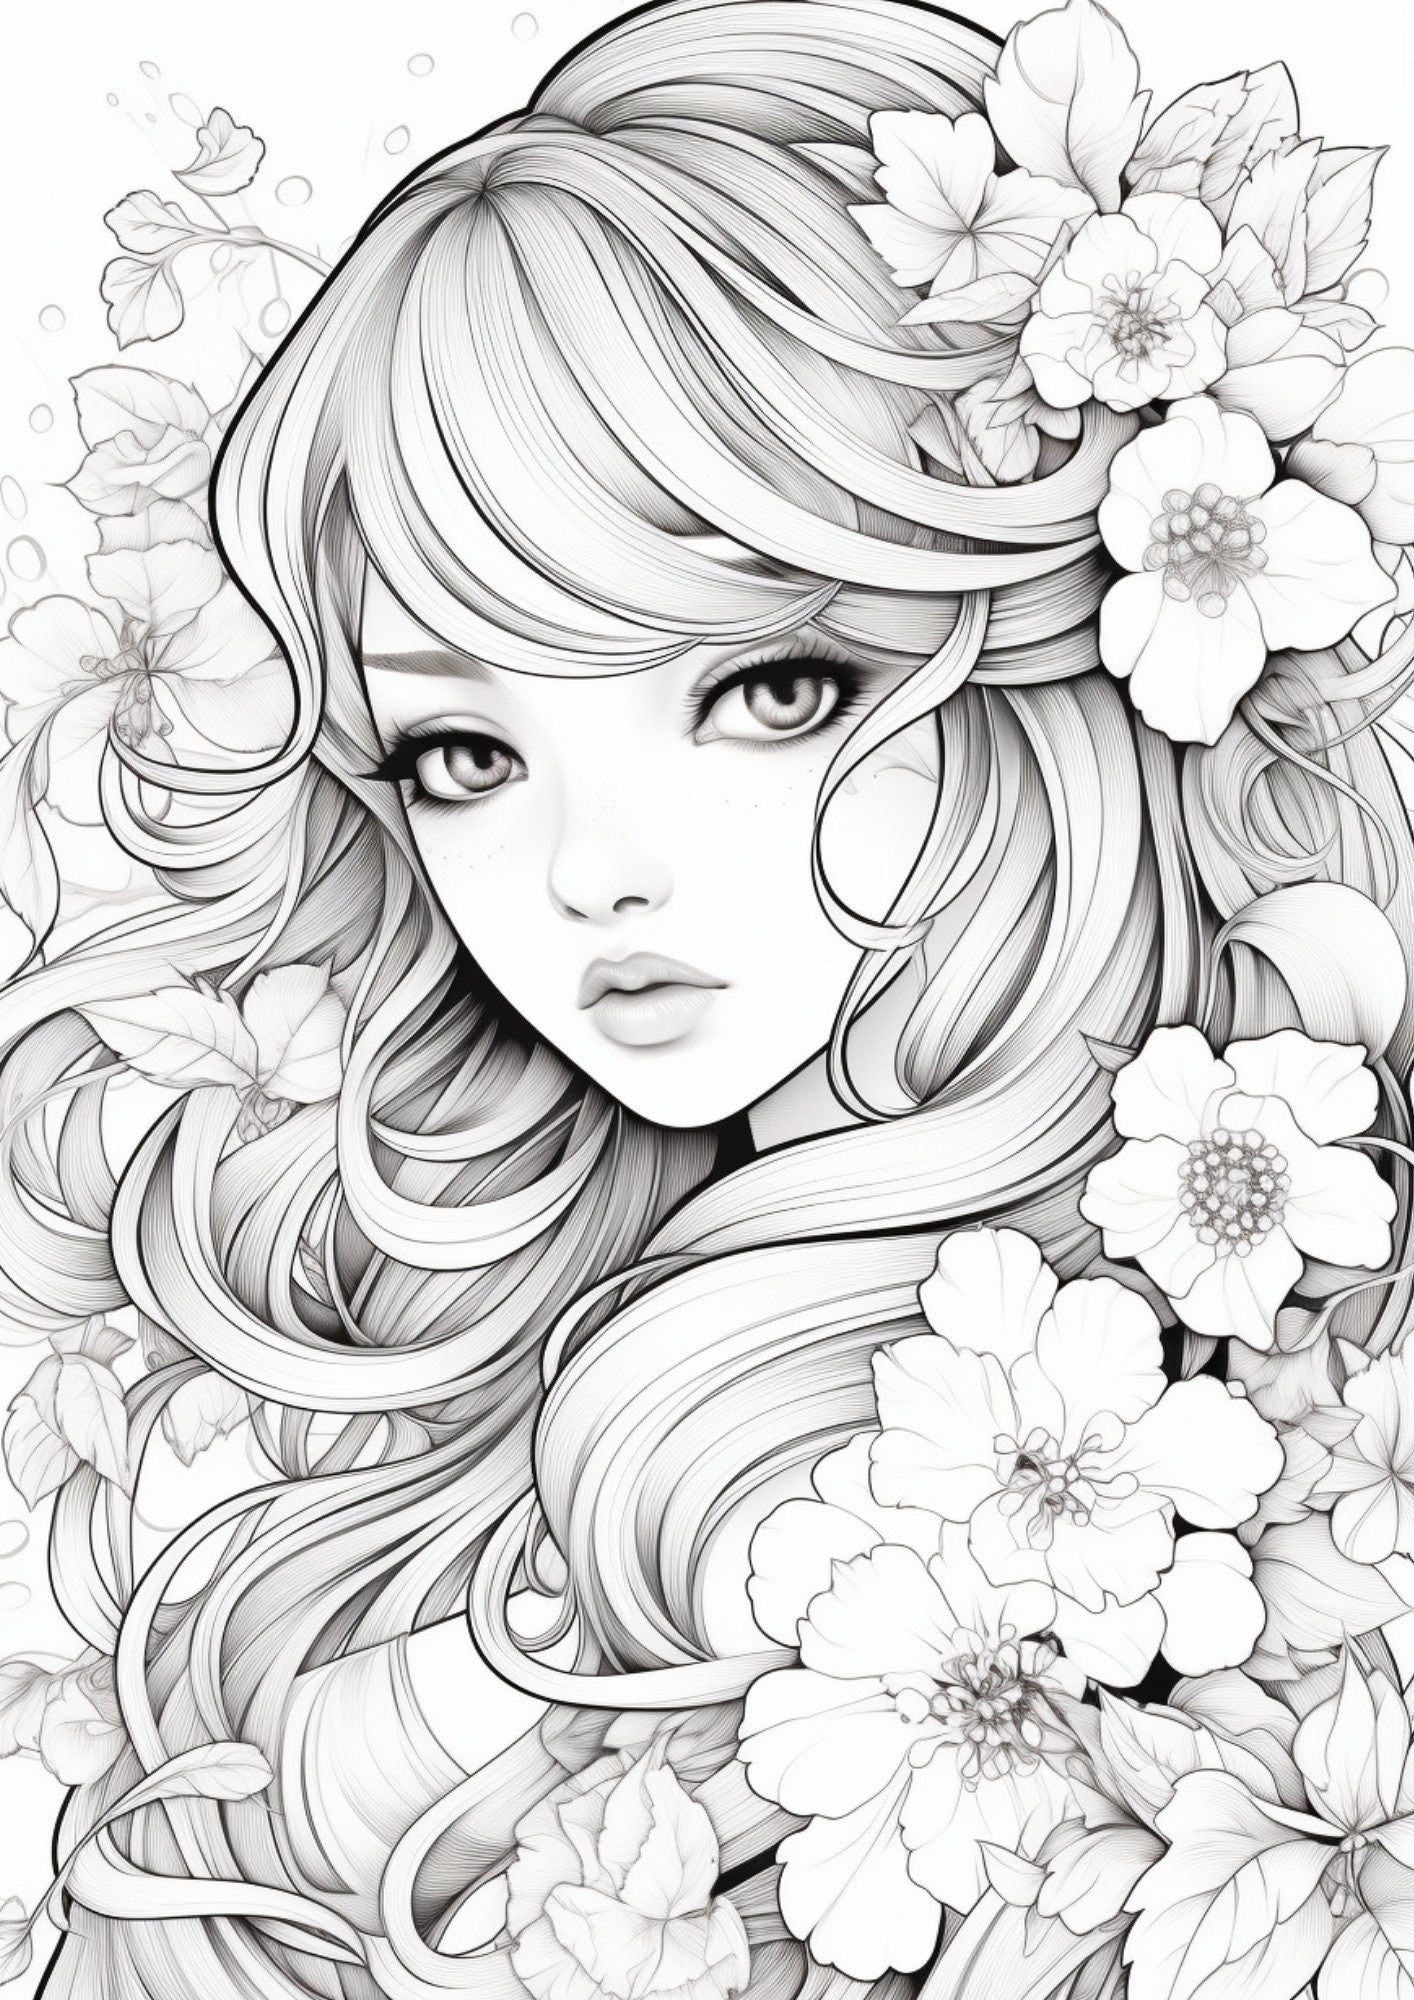 Anime Girls & Flowers Coloring Book - Intricate Blossom Designs and Uplifting Quotes for Relaxation